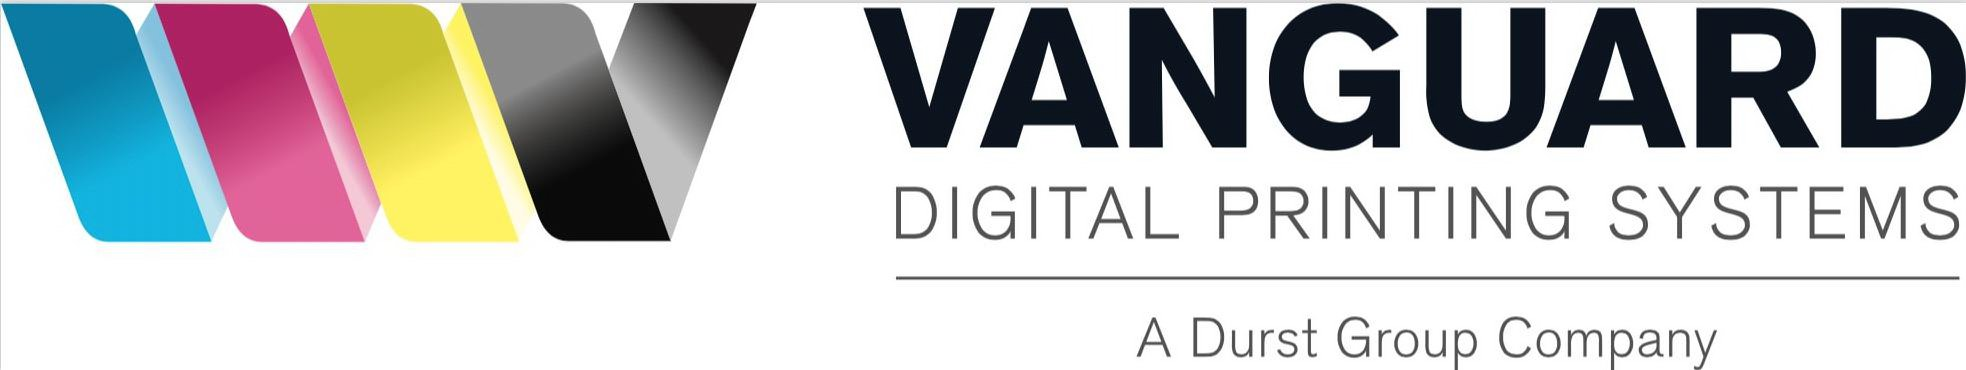  VANGUARD DIGITAL PRINTING SYSTEMS A DURST GROUP COMPANY